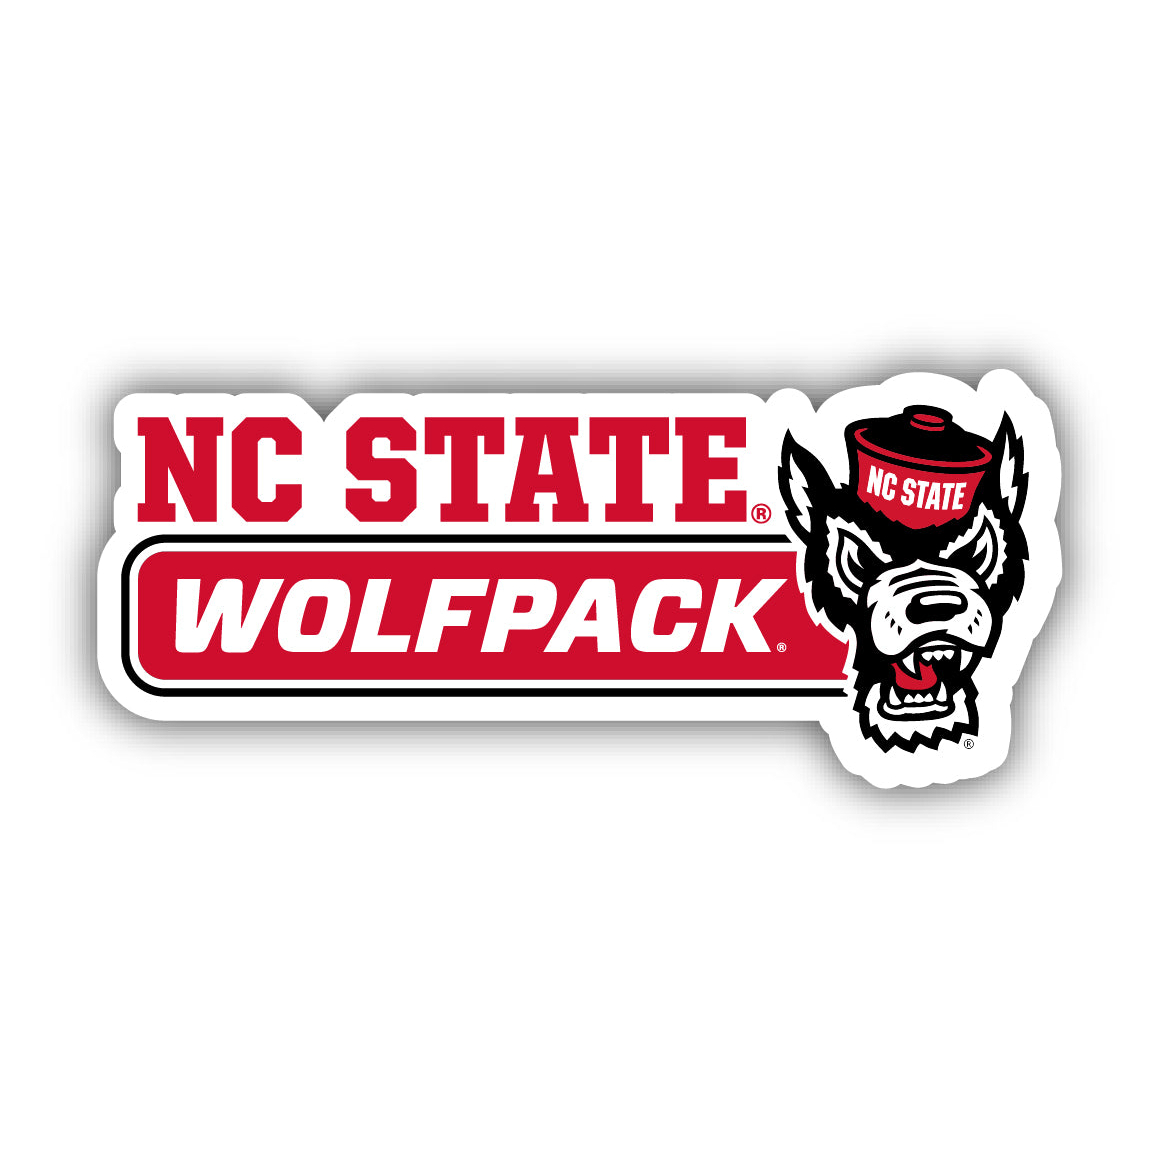 NC State Wolfpack 4 Inch Wide Colorful Vinyl Decal Sticker